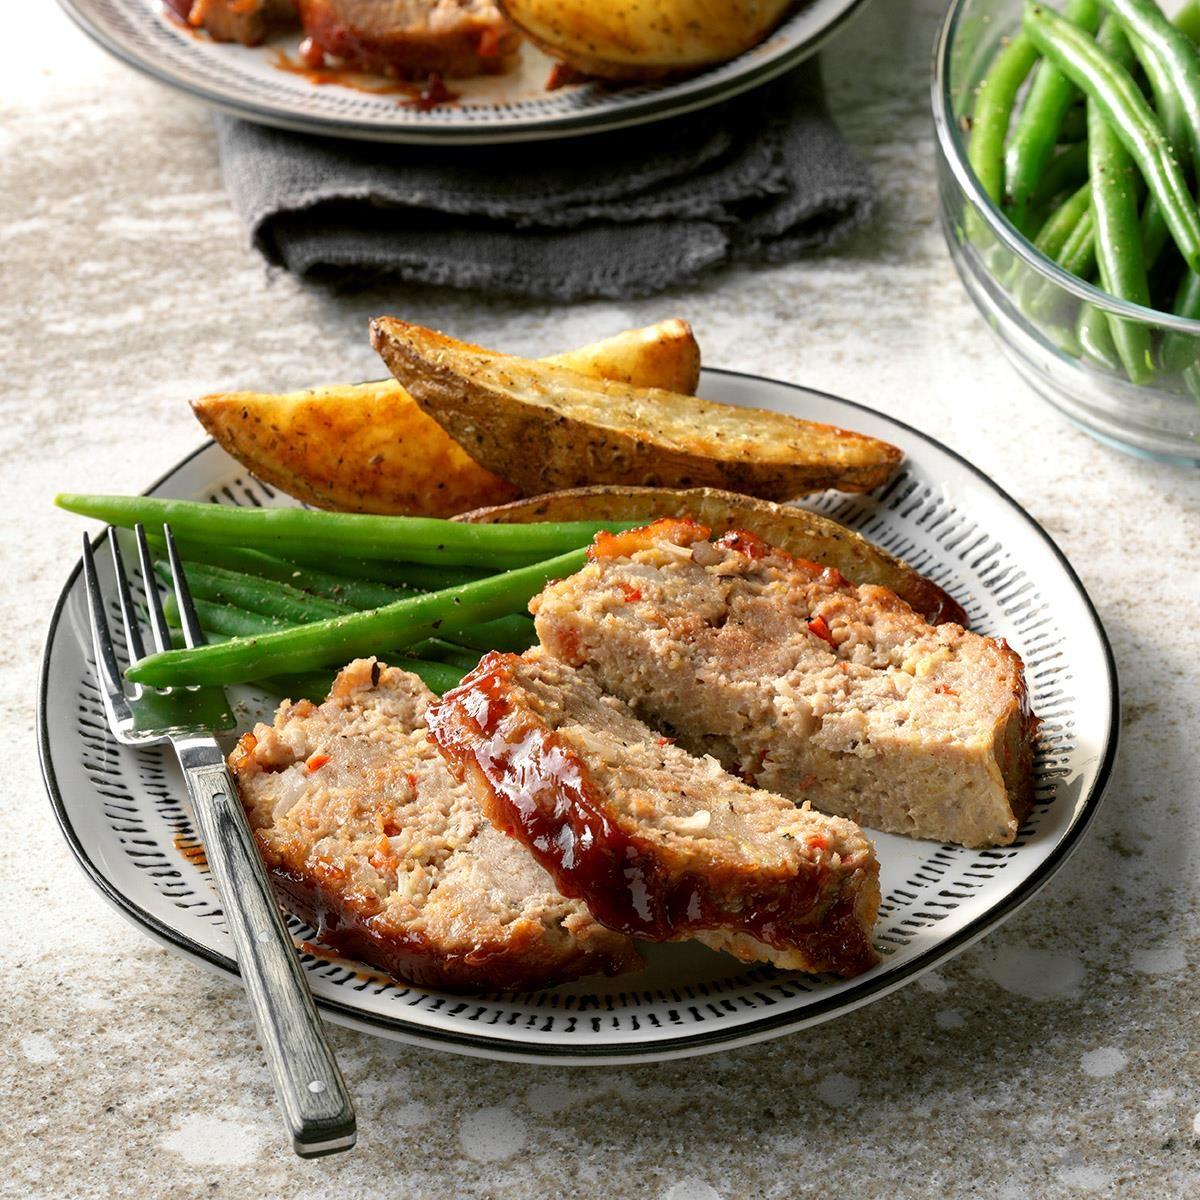 Day 27: Red Pepper Meat Loaf